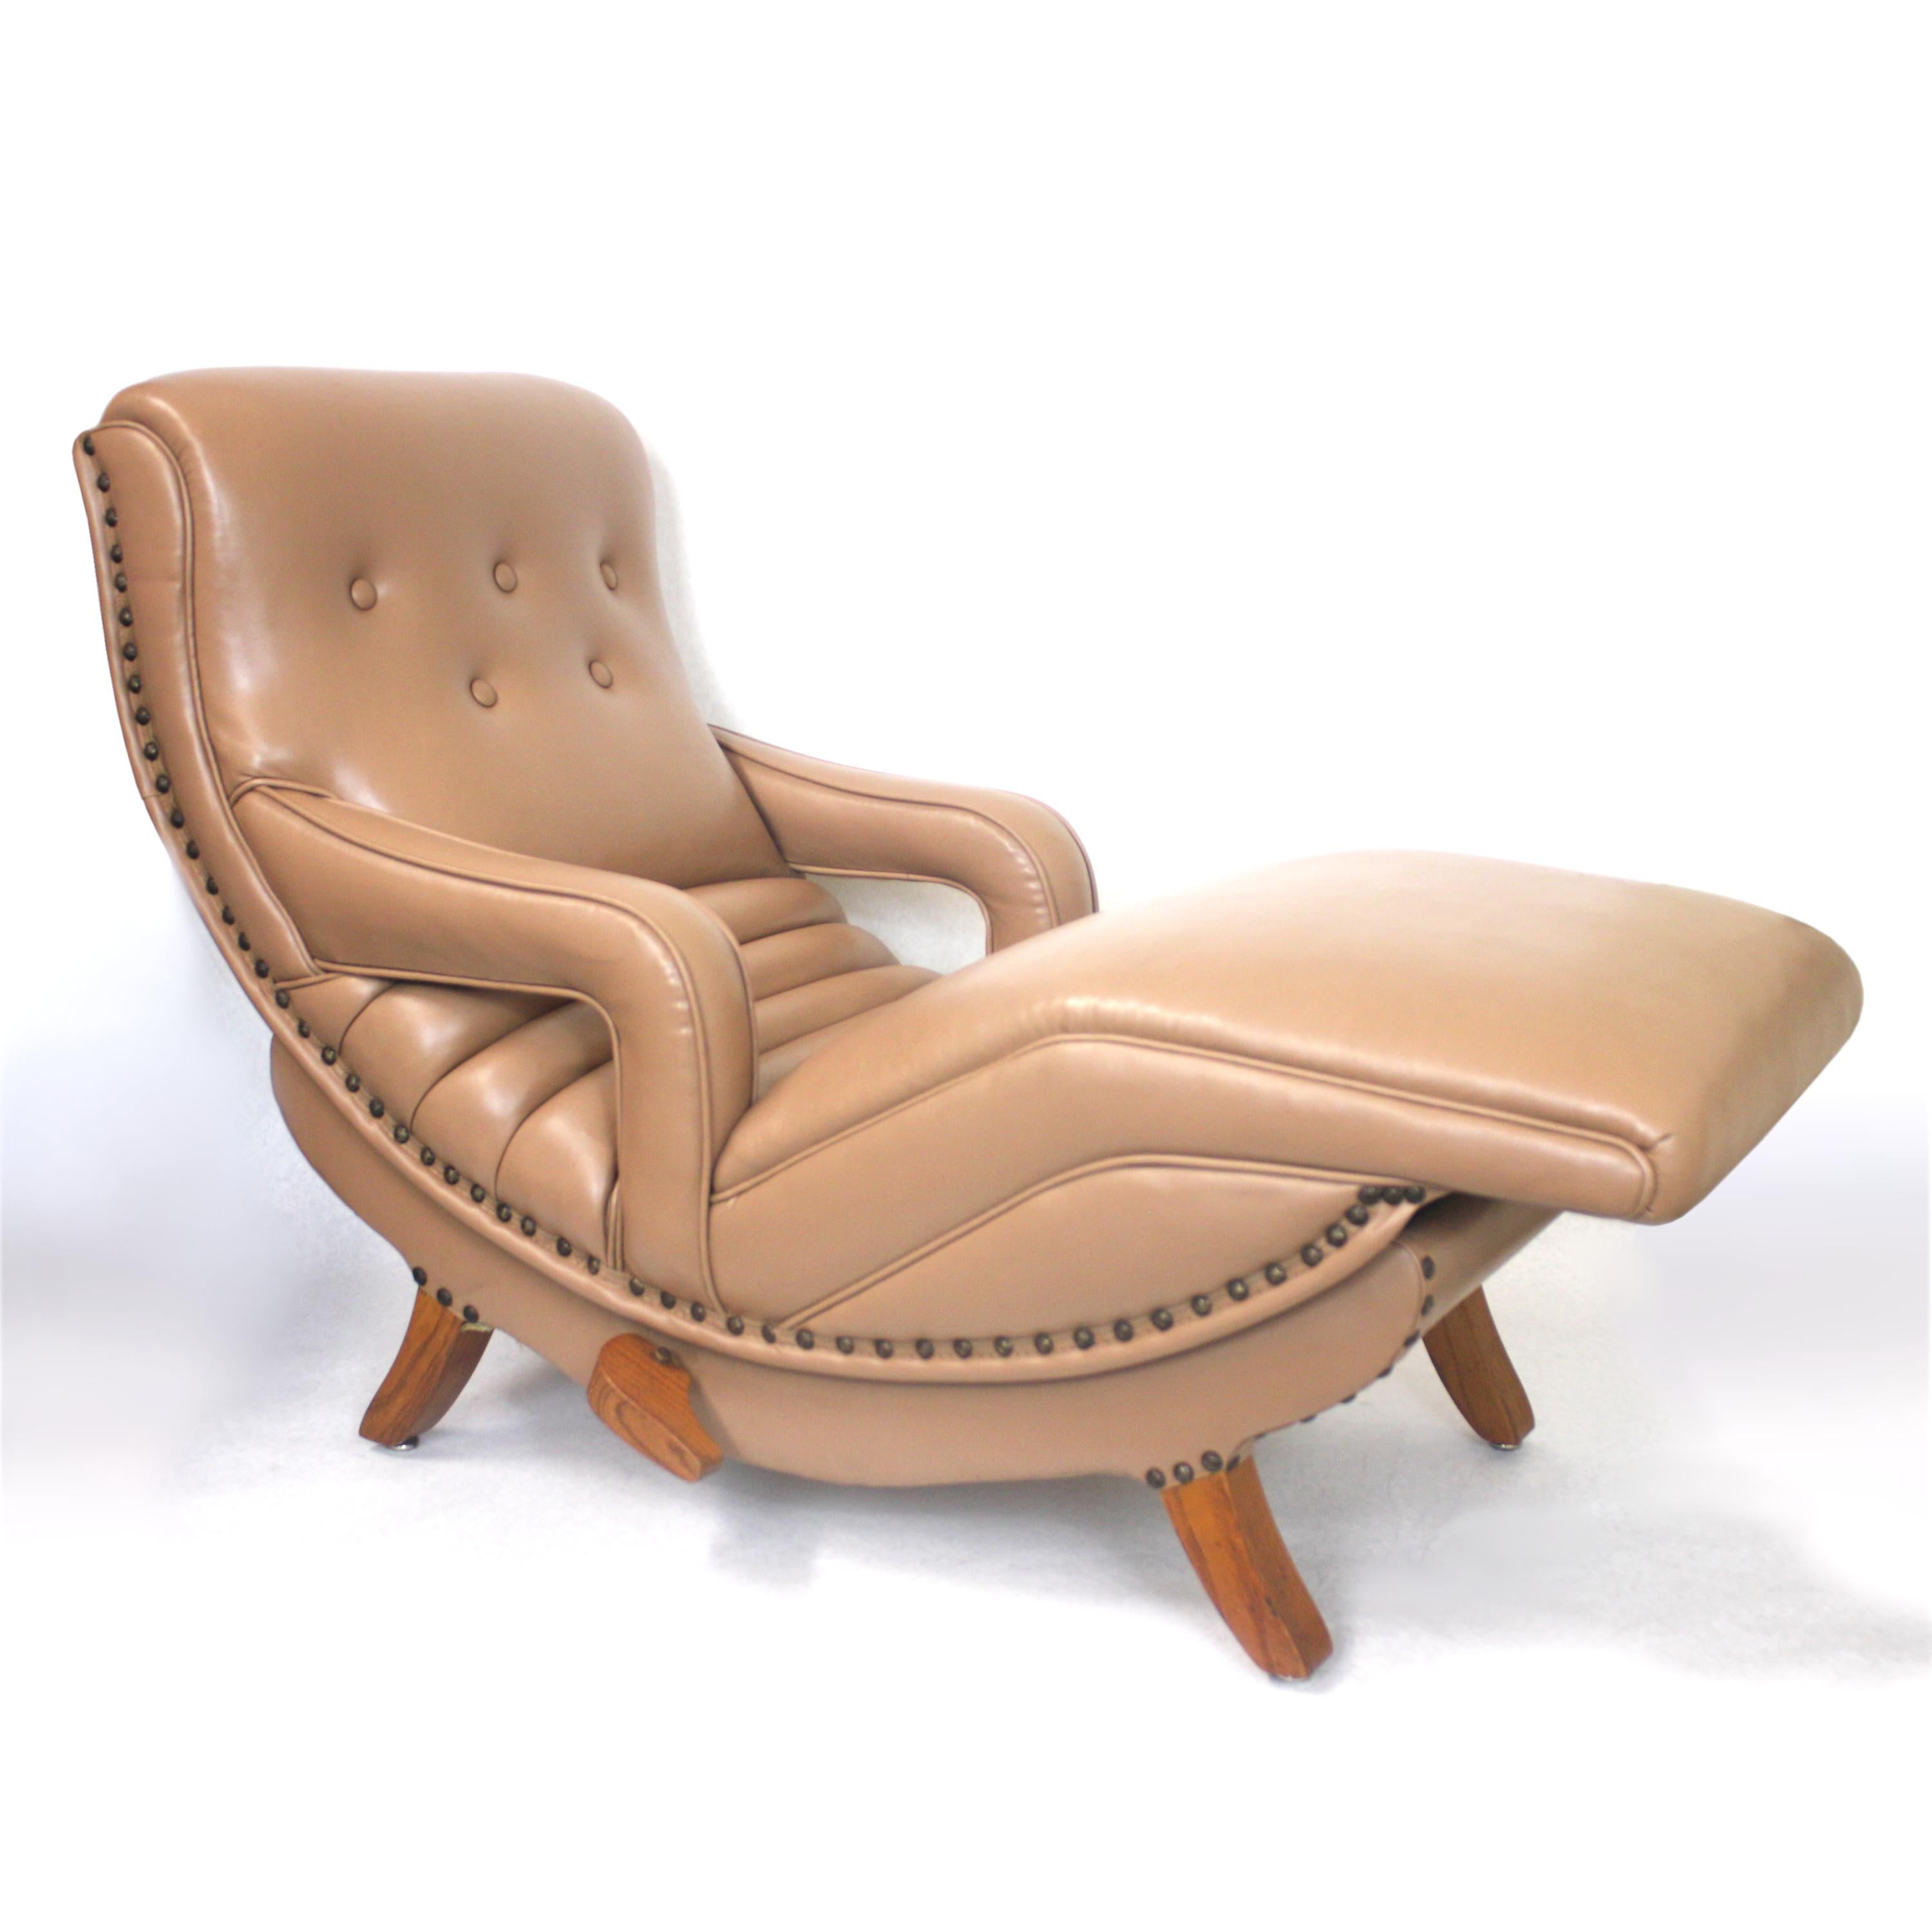 Rare Mid-Century Modern Child Size Miniature 3/4 Scale Contour Lounge Chair  no. For Sale at 1stDibs